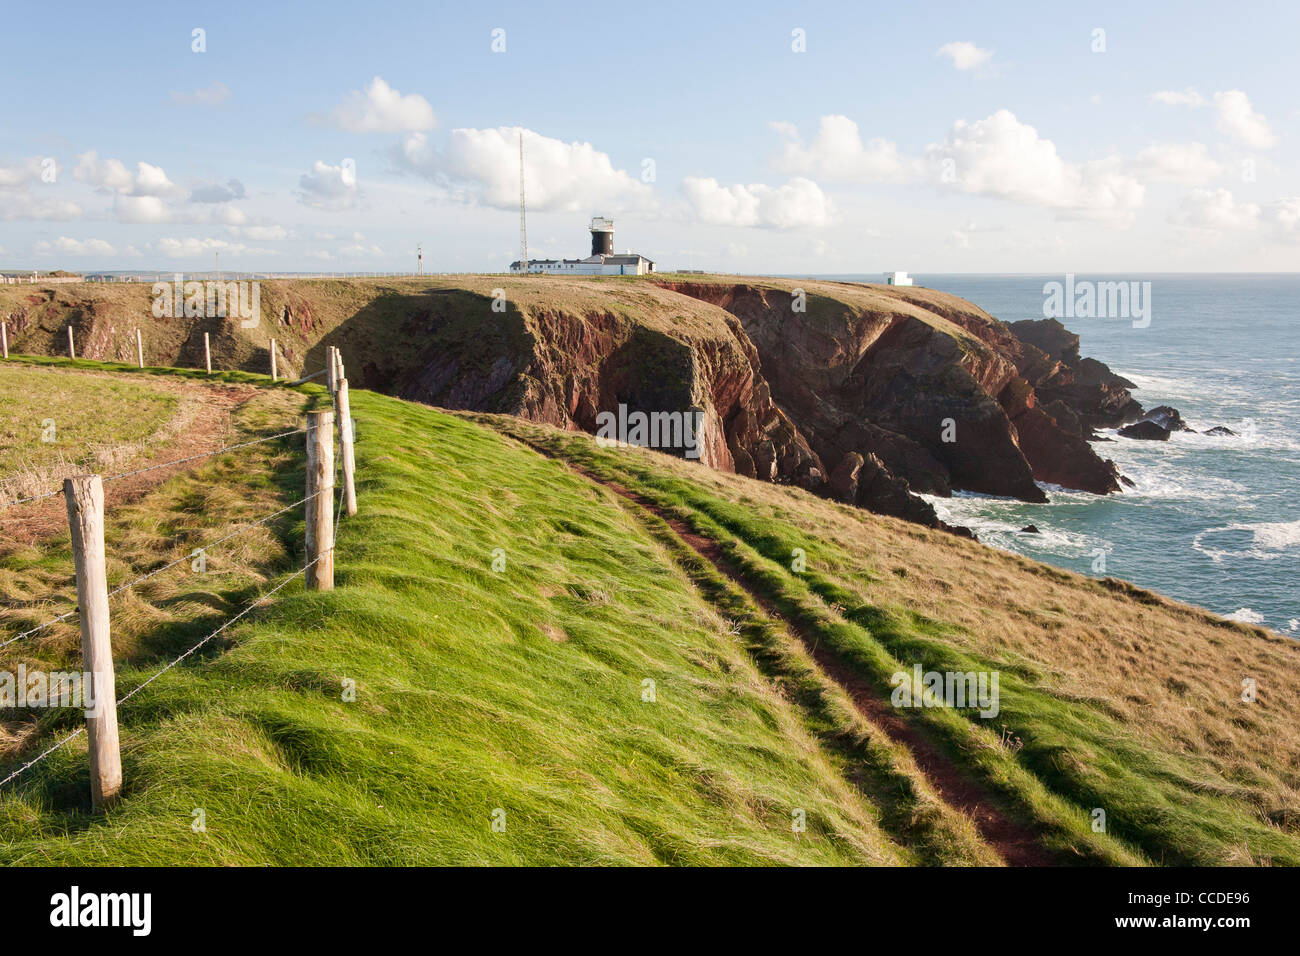 Scenic view of a cliff with lighthouse in the background in St Bride's Bay, southwest coast of Wales. Stock Photo